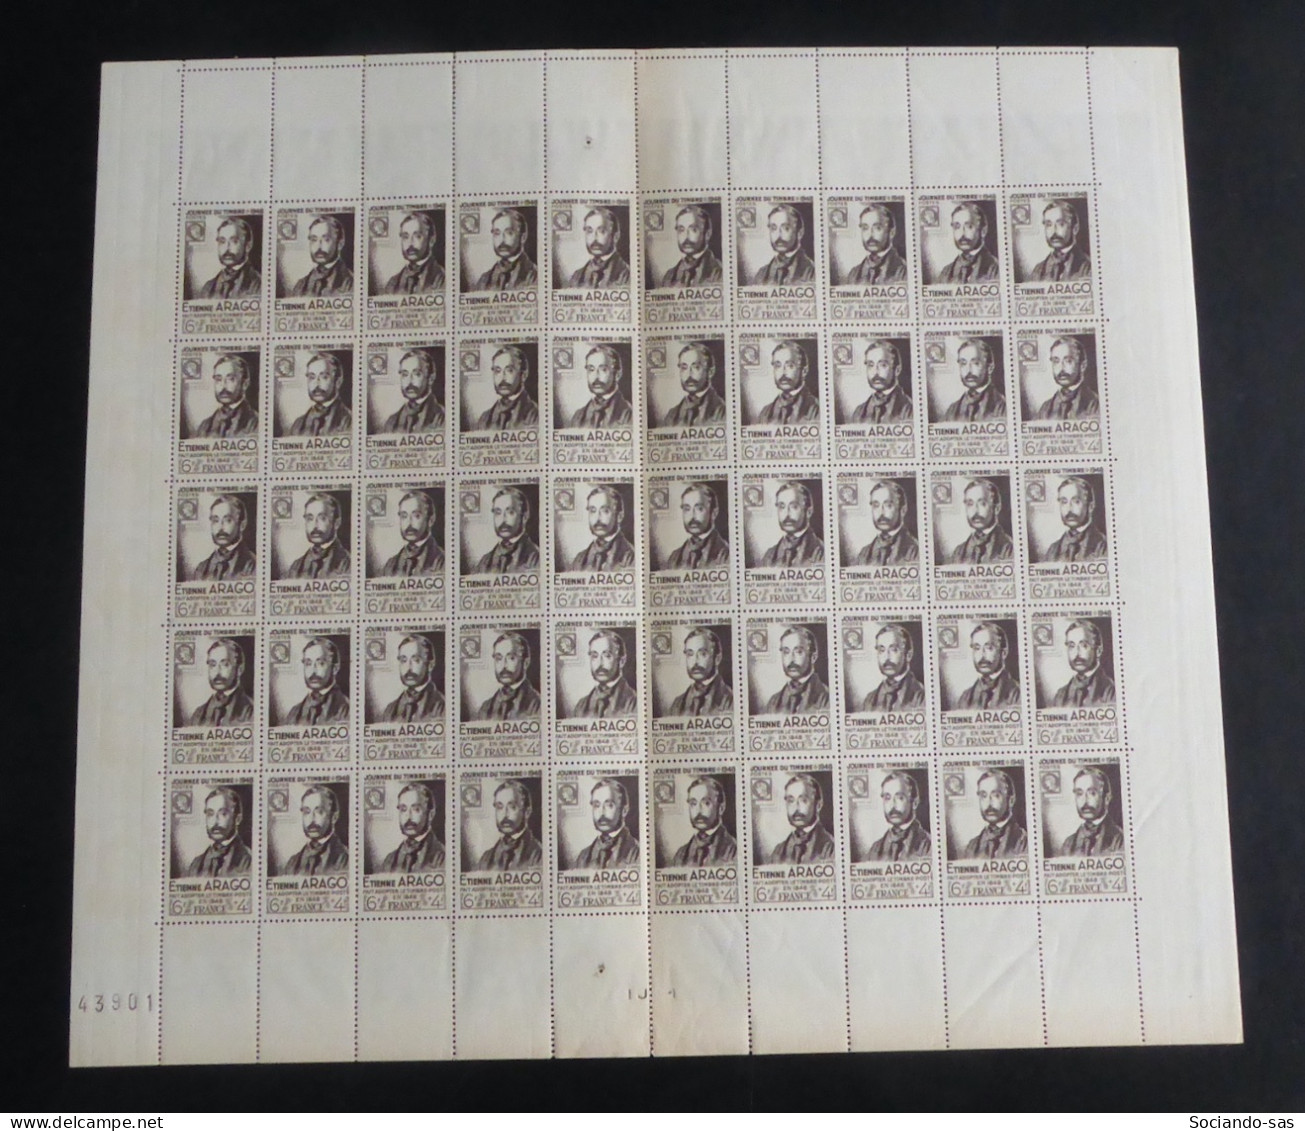 FRANCE - 1948 - N°YT. 794 - Arago - Feuille Complète - Neuf Luxe ** / MNH - Full Sheets